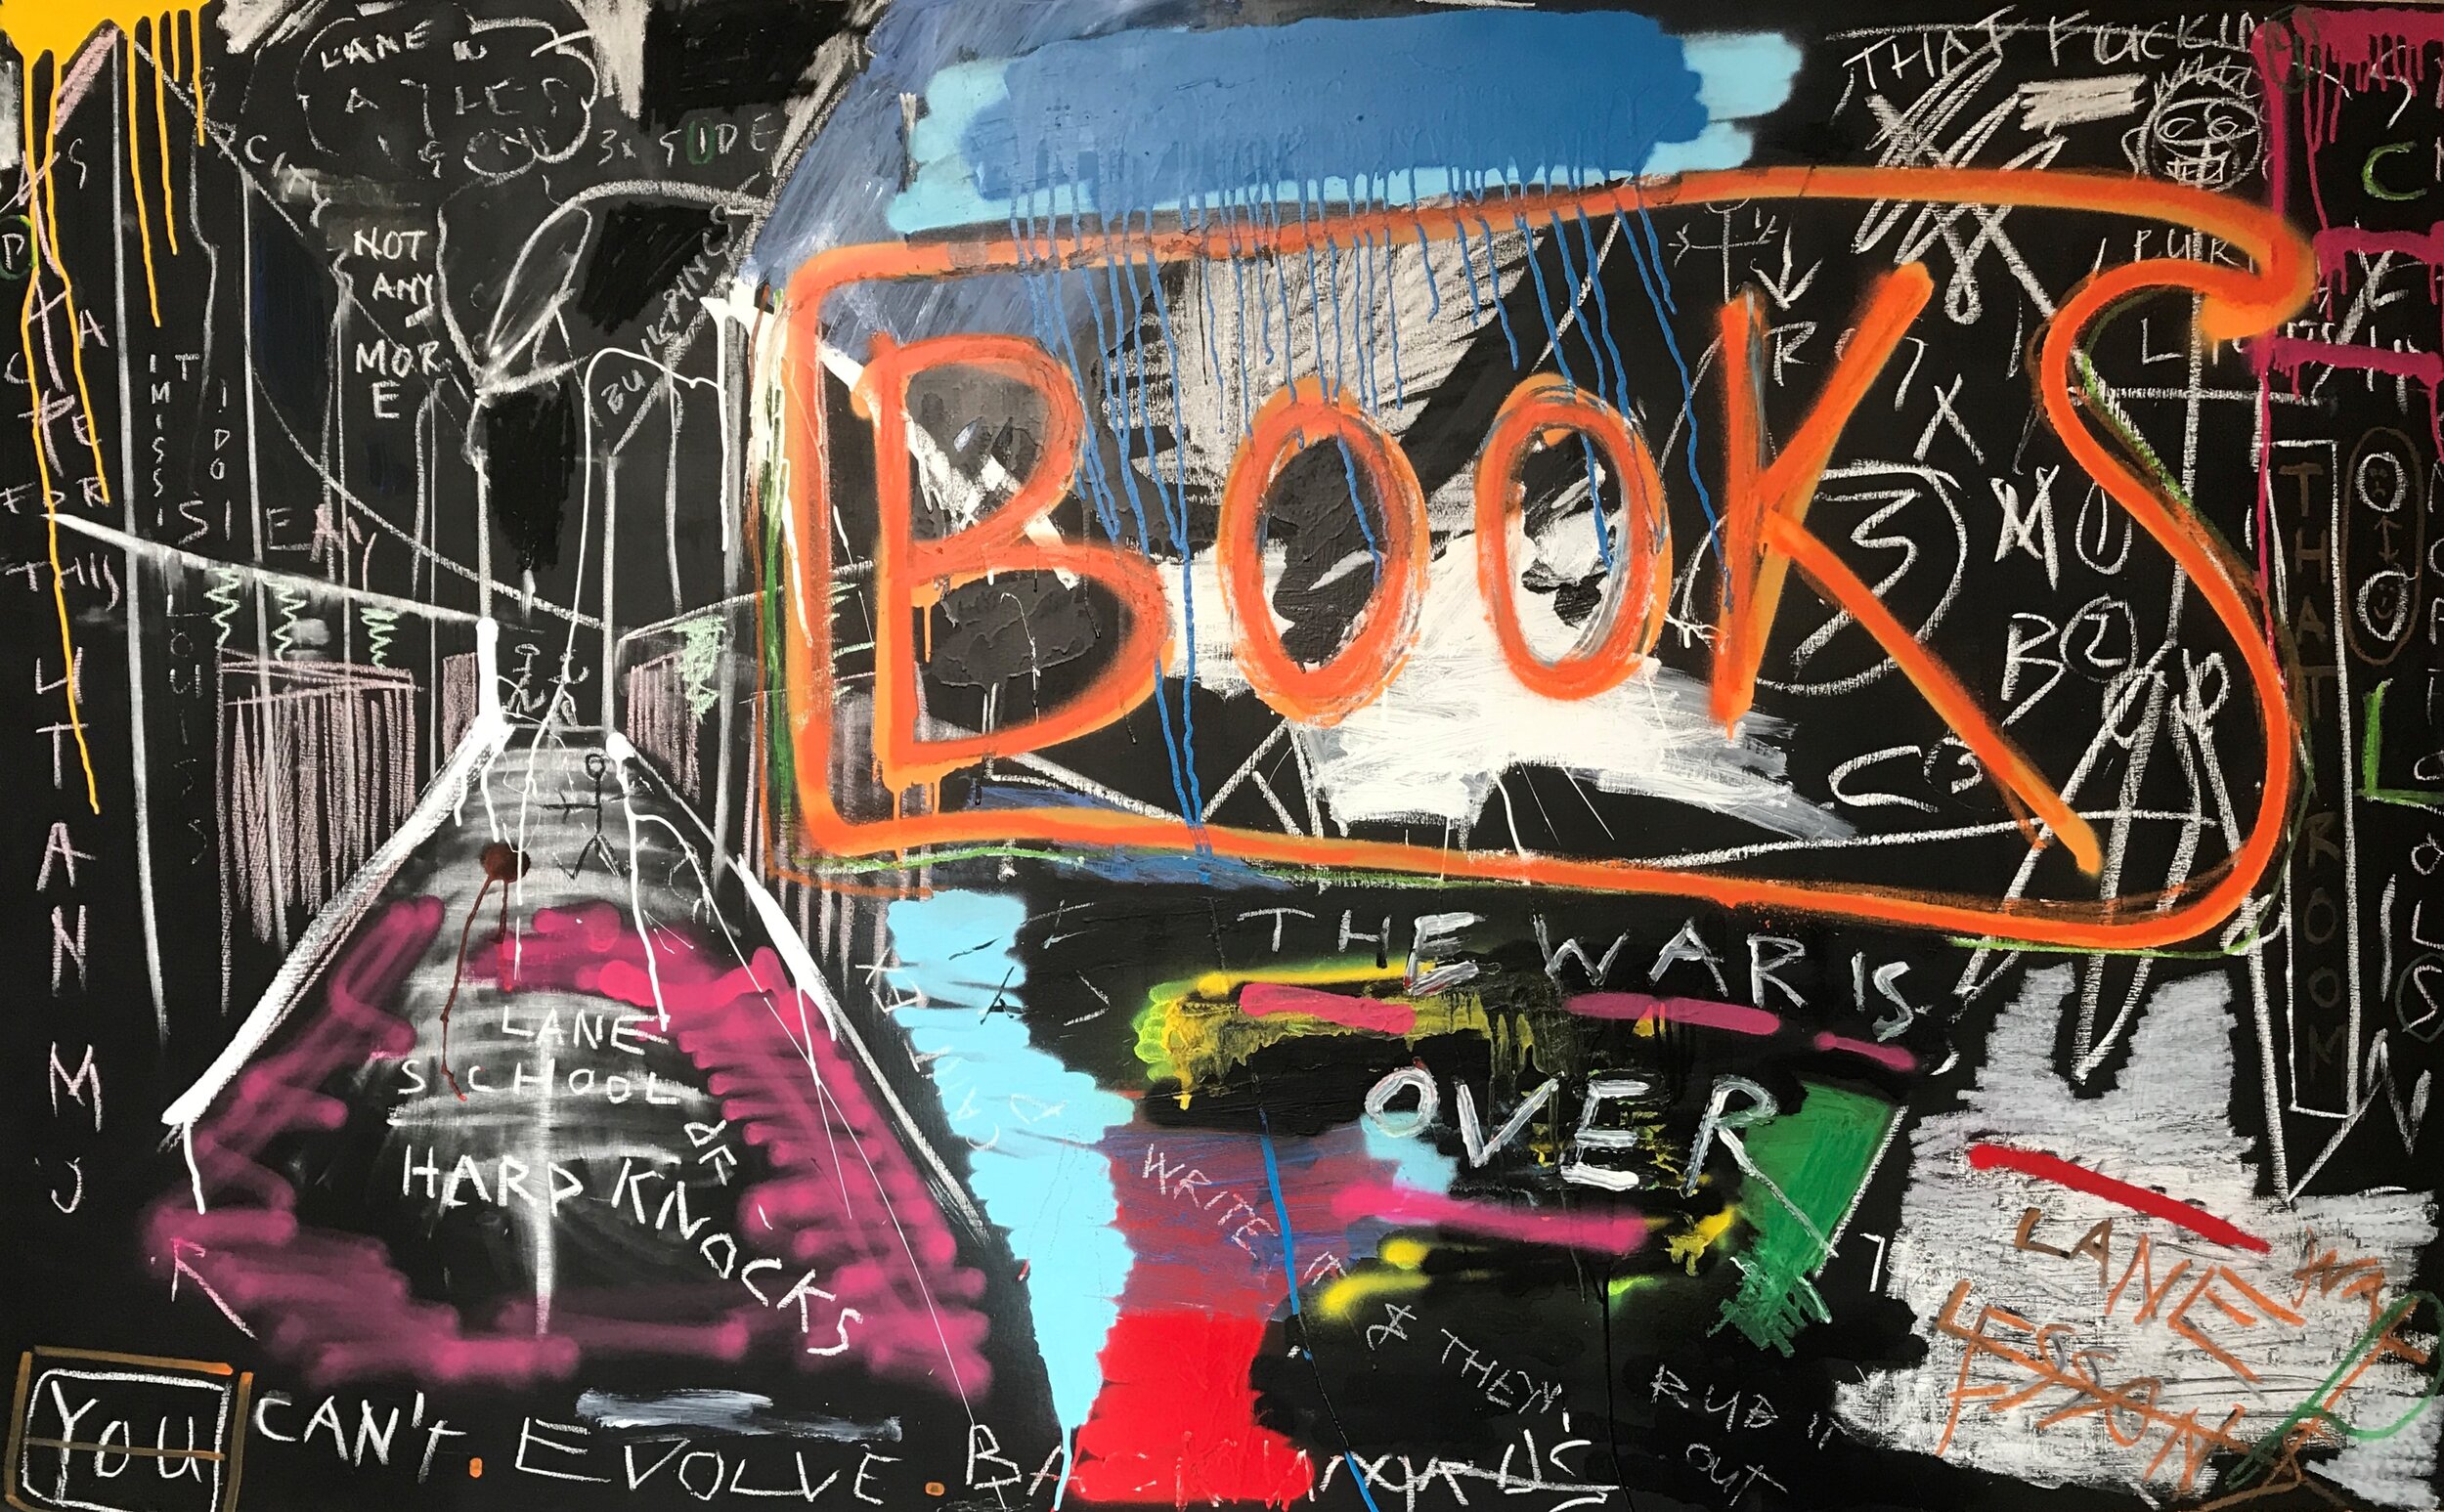 "School of Hard Knocks" an artwork created on a chalkboard by Irish artist PIGSY in his modern expressionist style (Copy) (Copy) (Copy)